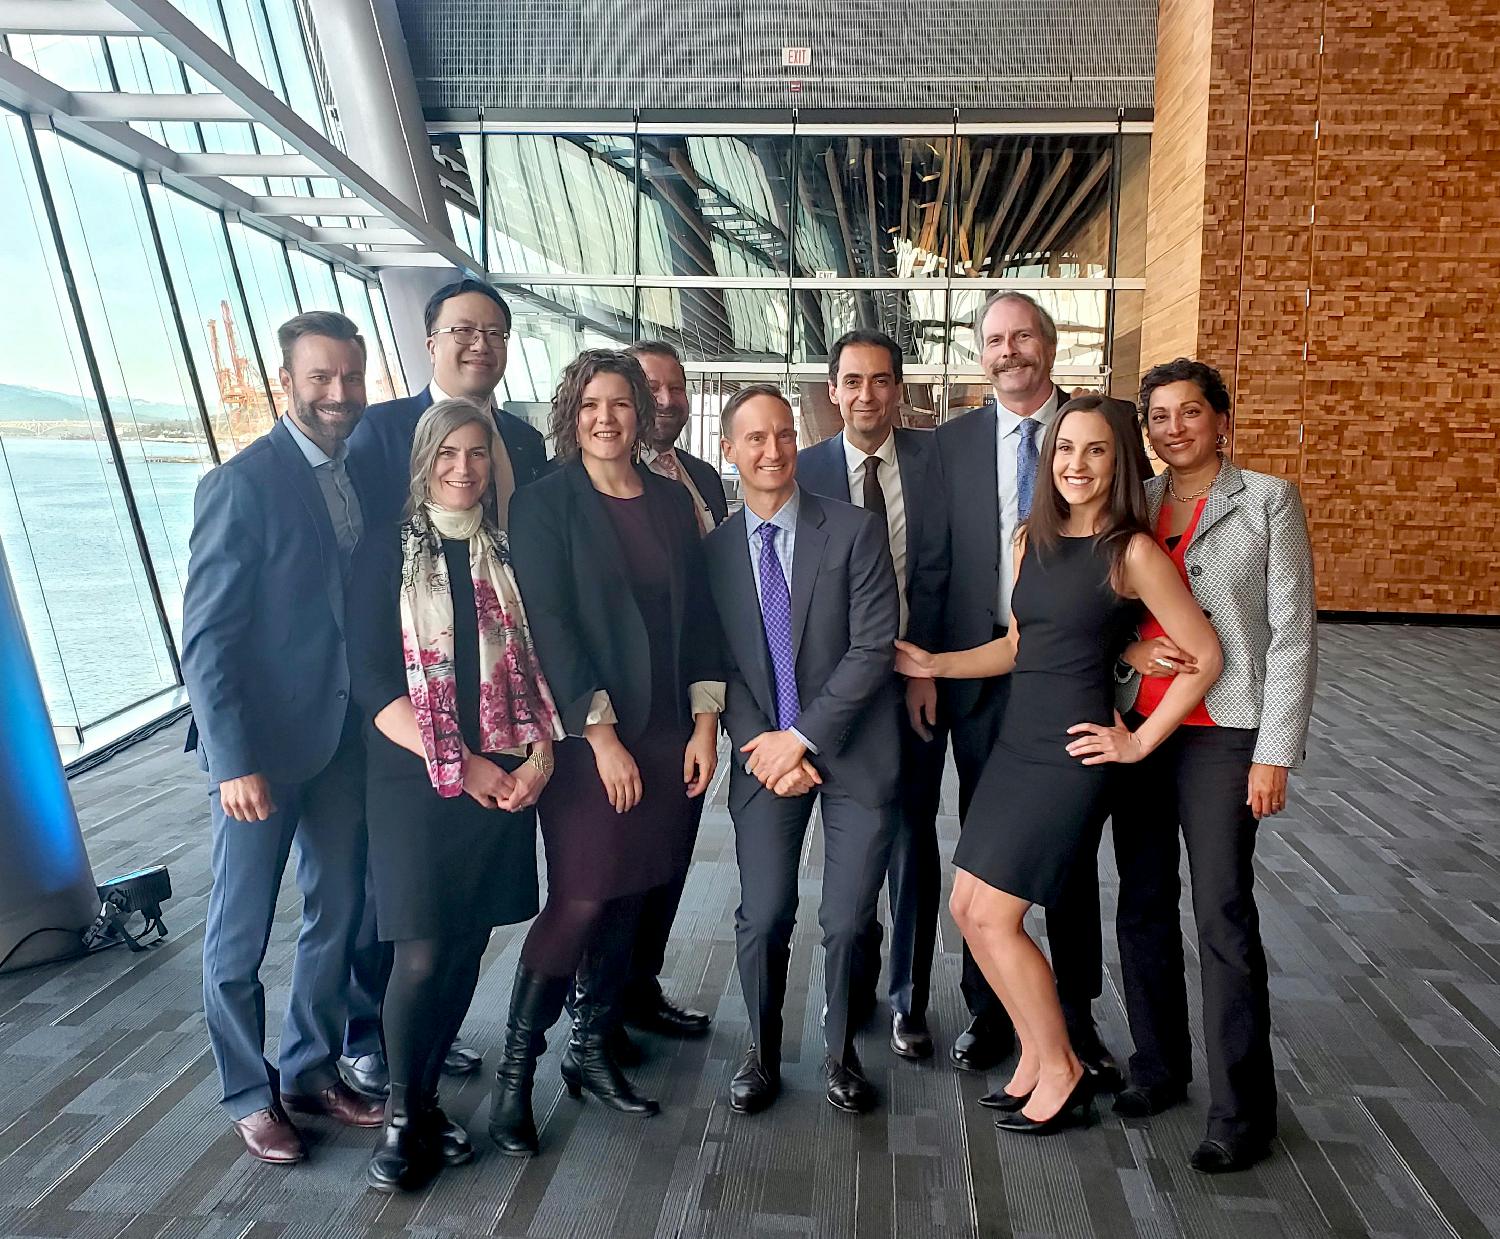 21st Annual Life Sciences BC Awards 2019